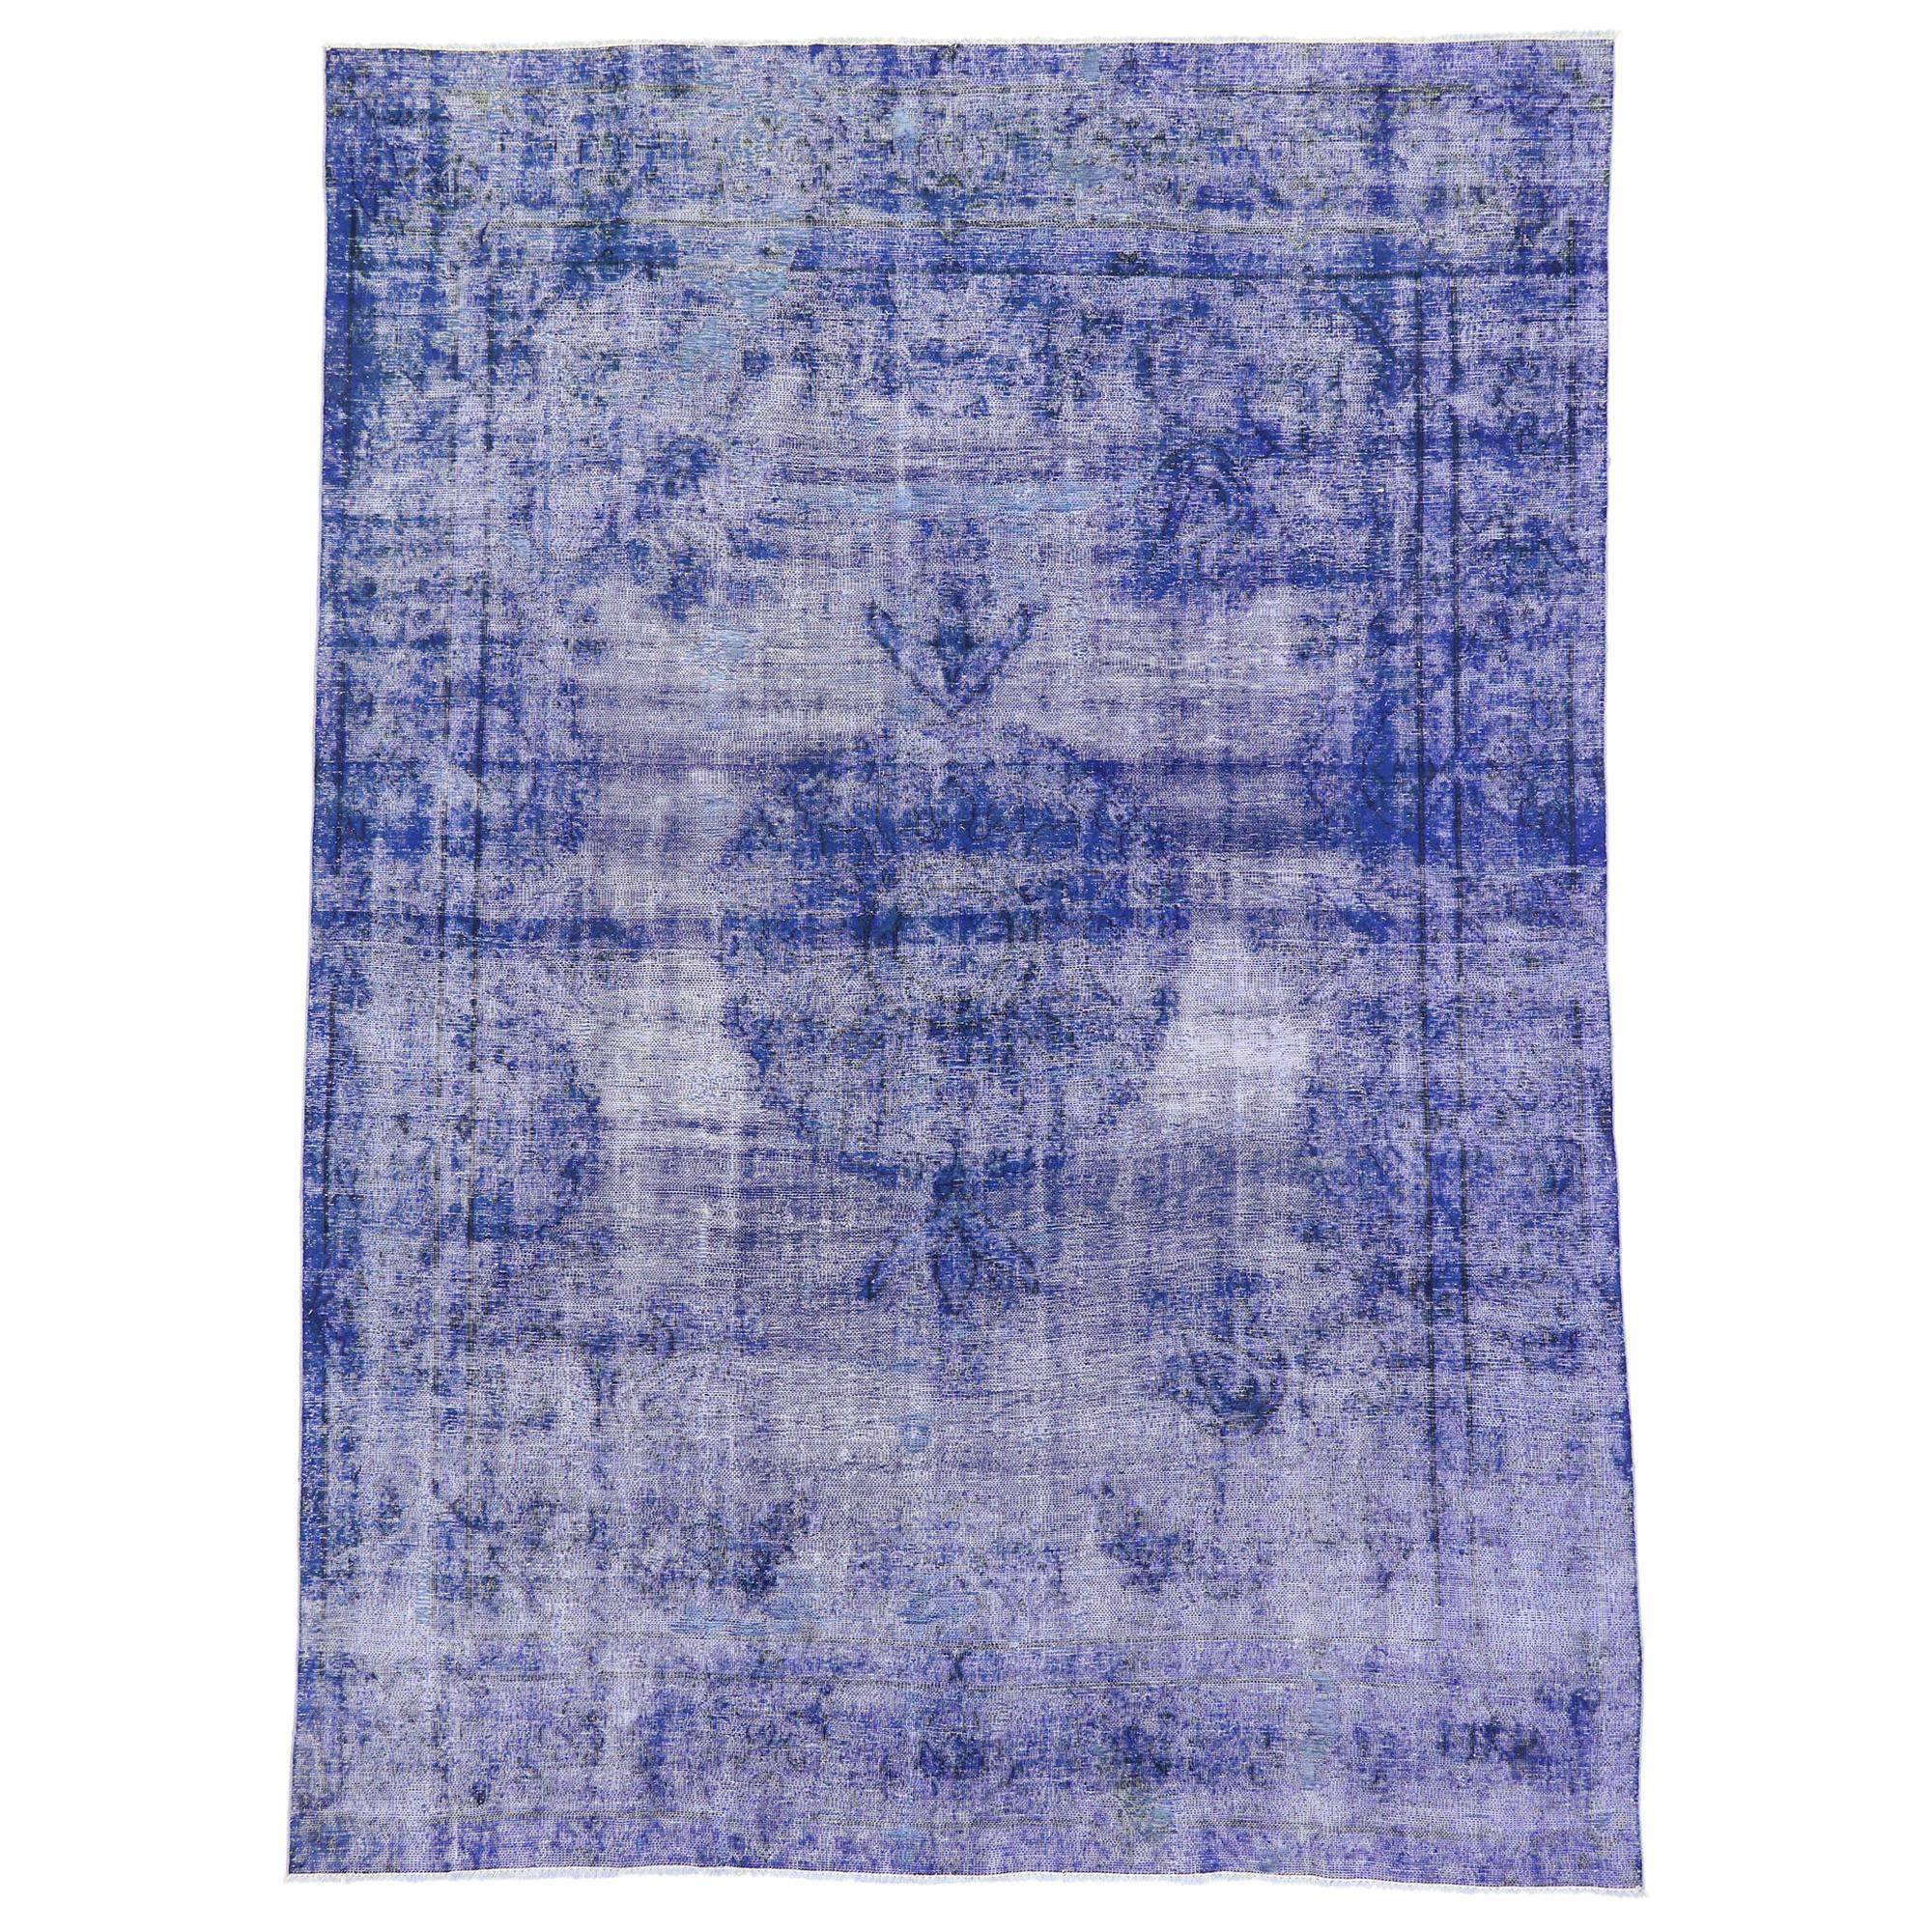 Distressed Vintage Blue Overdyed Persian Rug with Modern Style